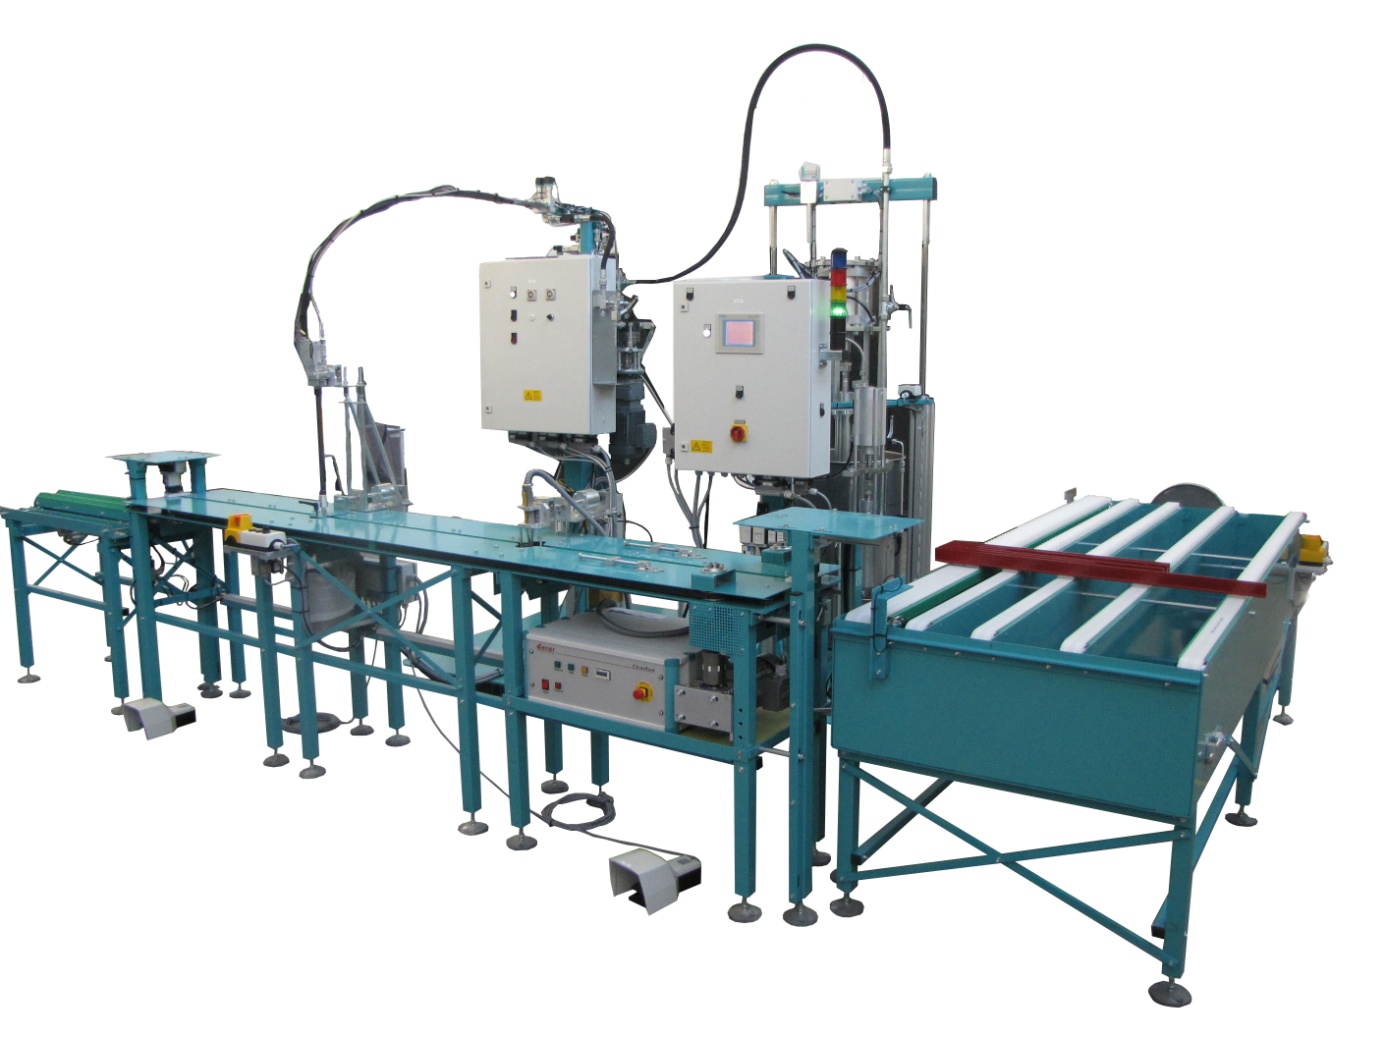 Automated 2-component bonding machine for profiles, with plasma pre-treatment from t-s-i.de